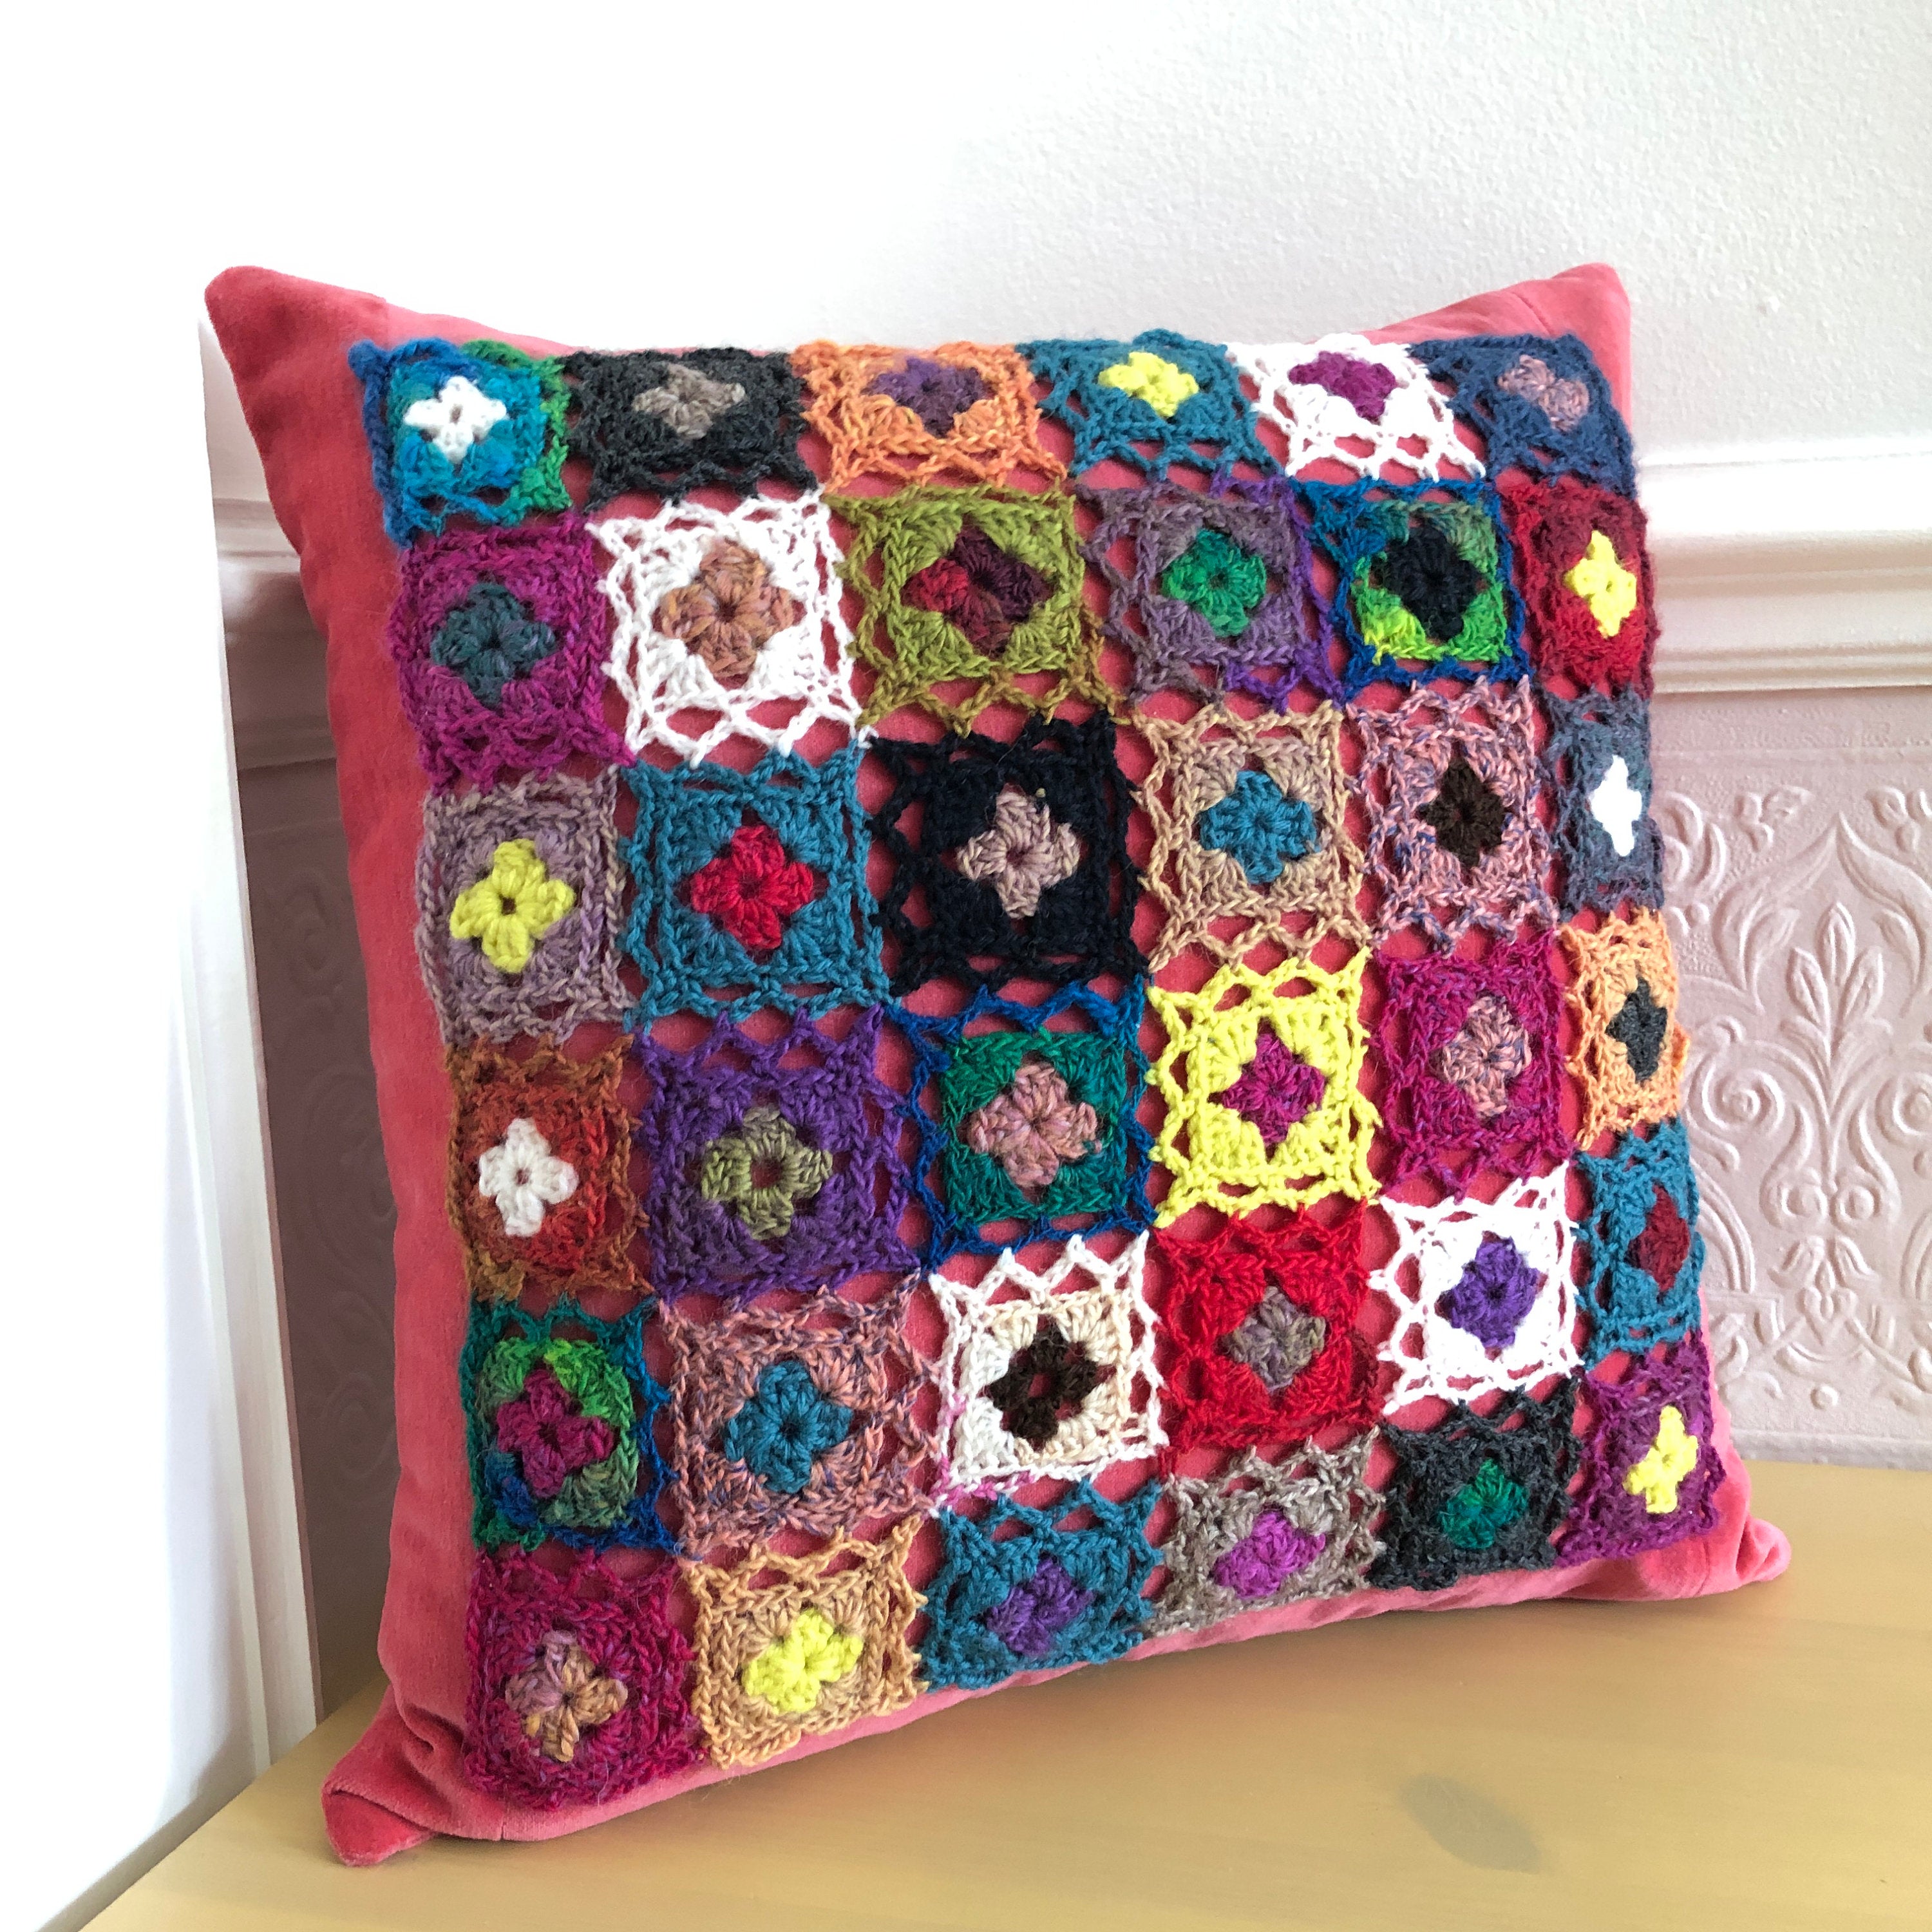 Pillow Cover with Crocheted Decor